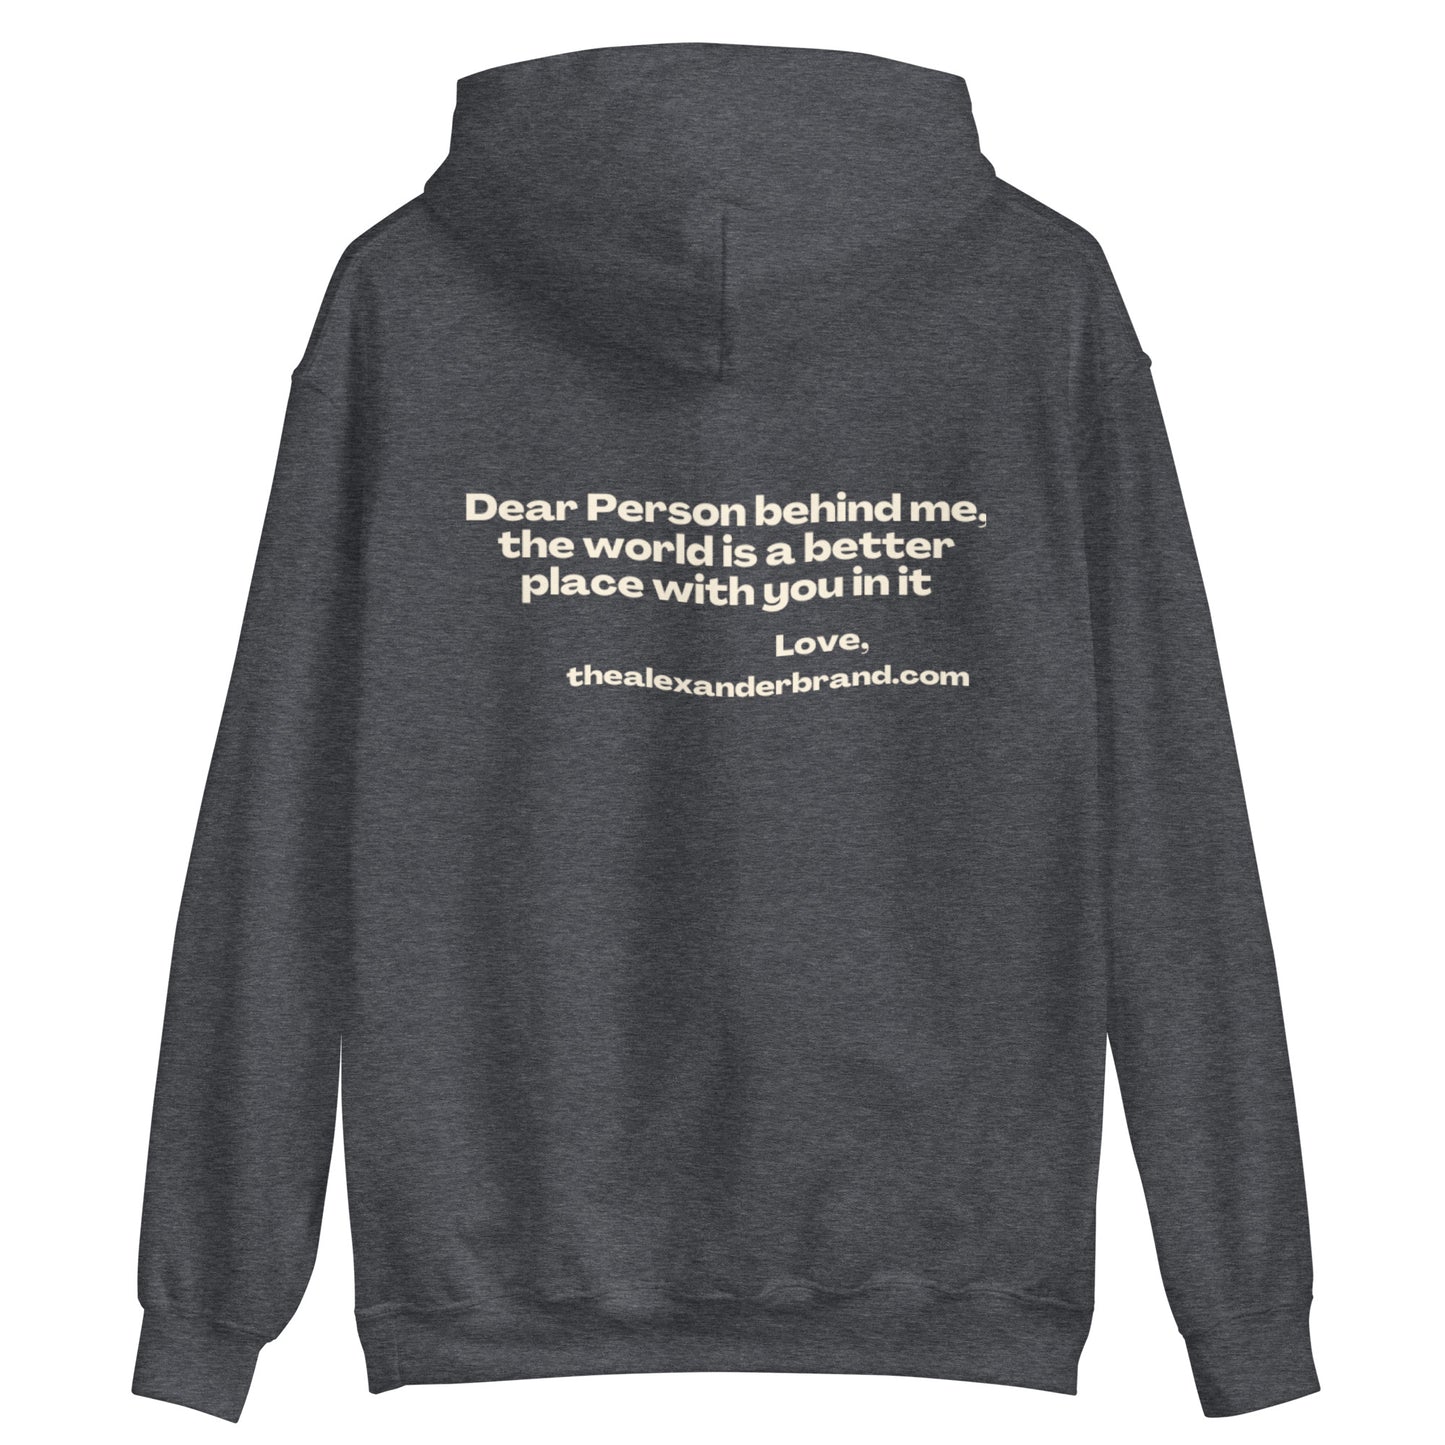 Dear Person Behind me, the world is a better place with you in it -Unisex Hoodie